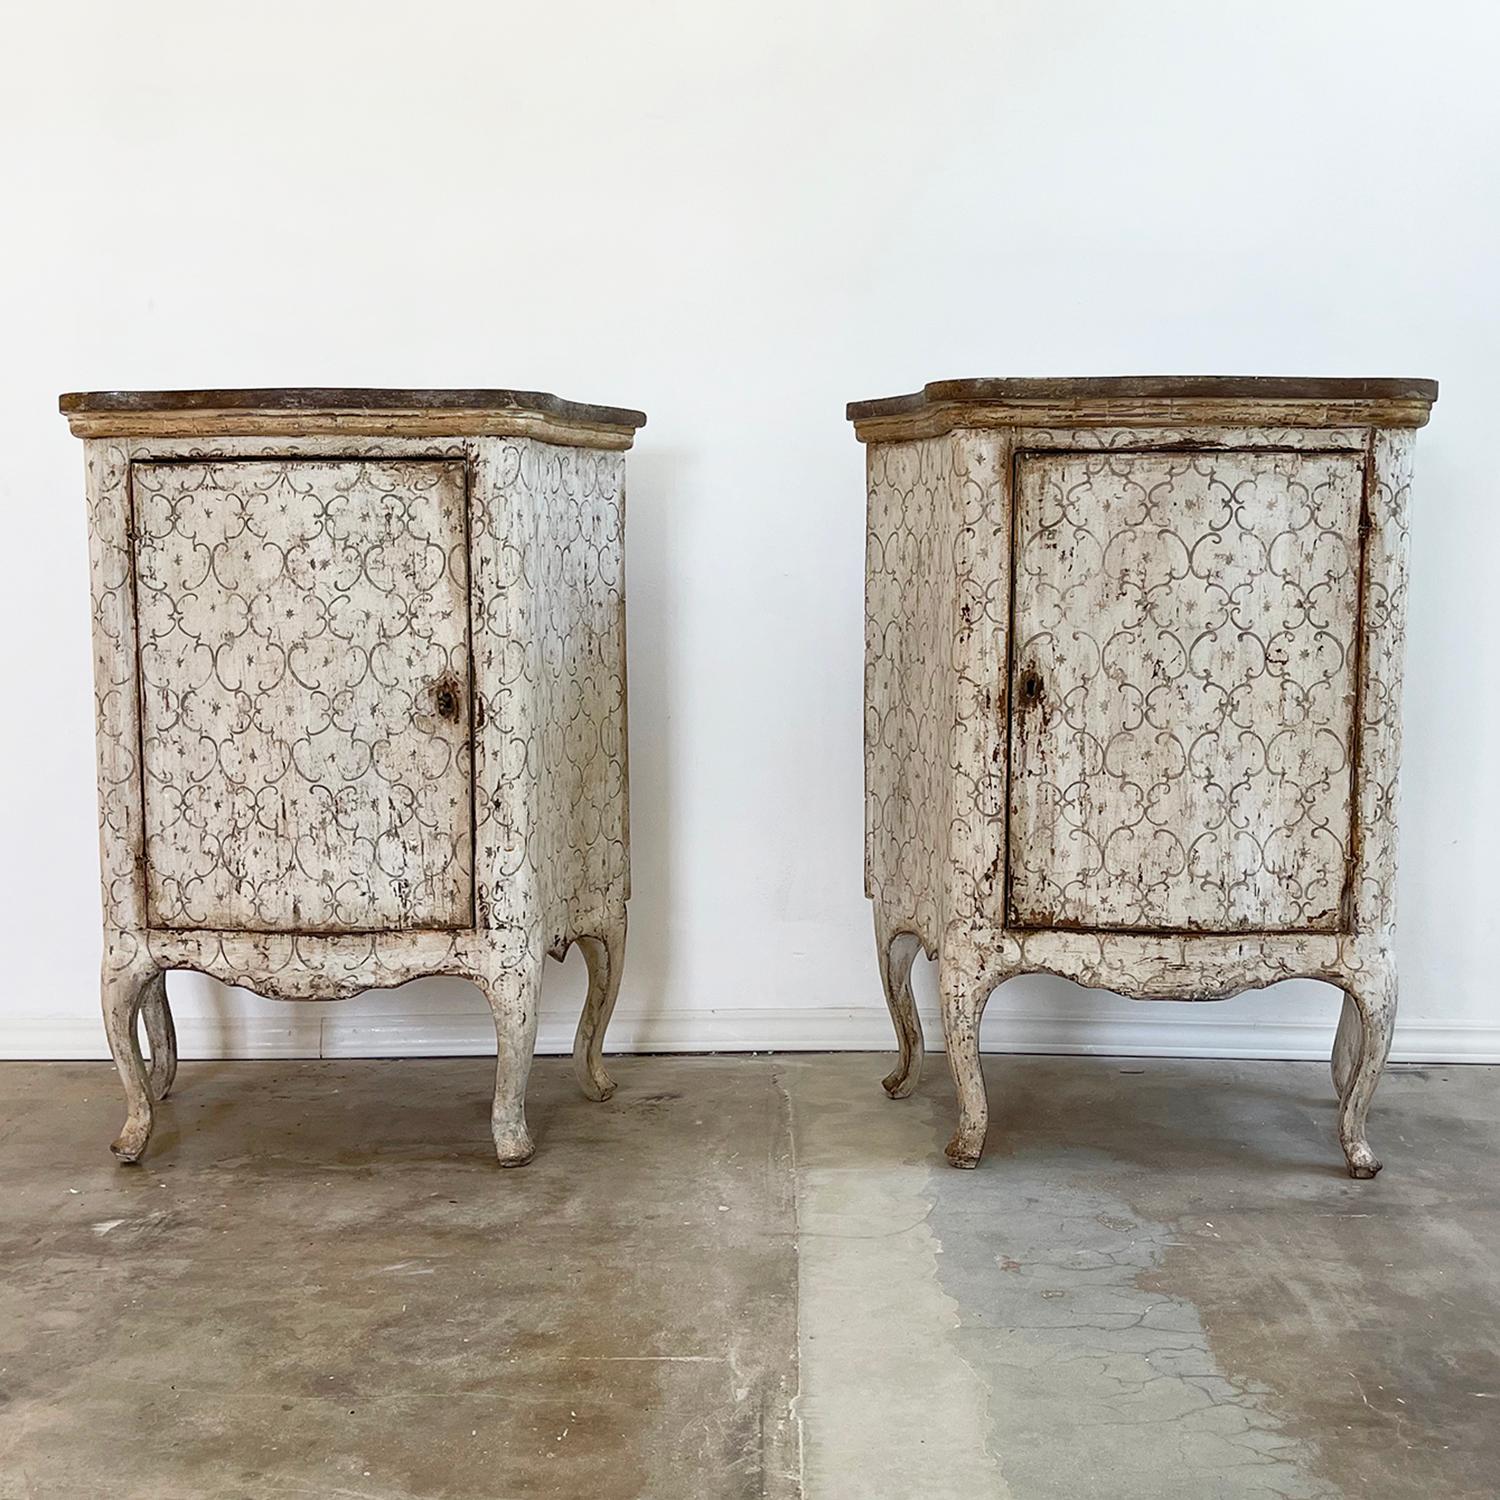 An antique Italian pair of Louis XIV small commodes in legno laccato painted light grey with a brown ornamental pattern and a door. The detailed nightstands are made of hand crafted Pinewood, consisting its original metal hardware and key, in good